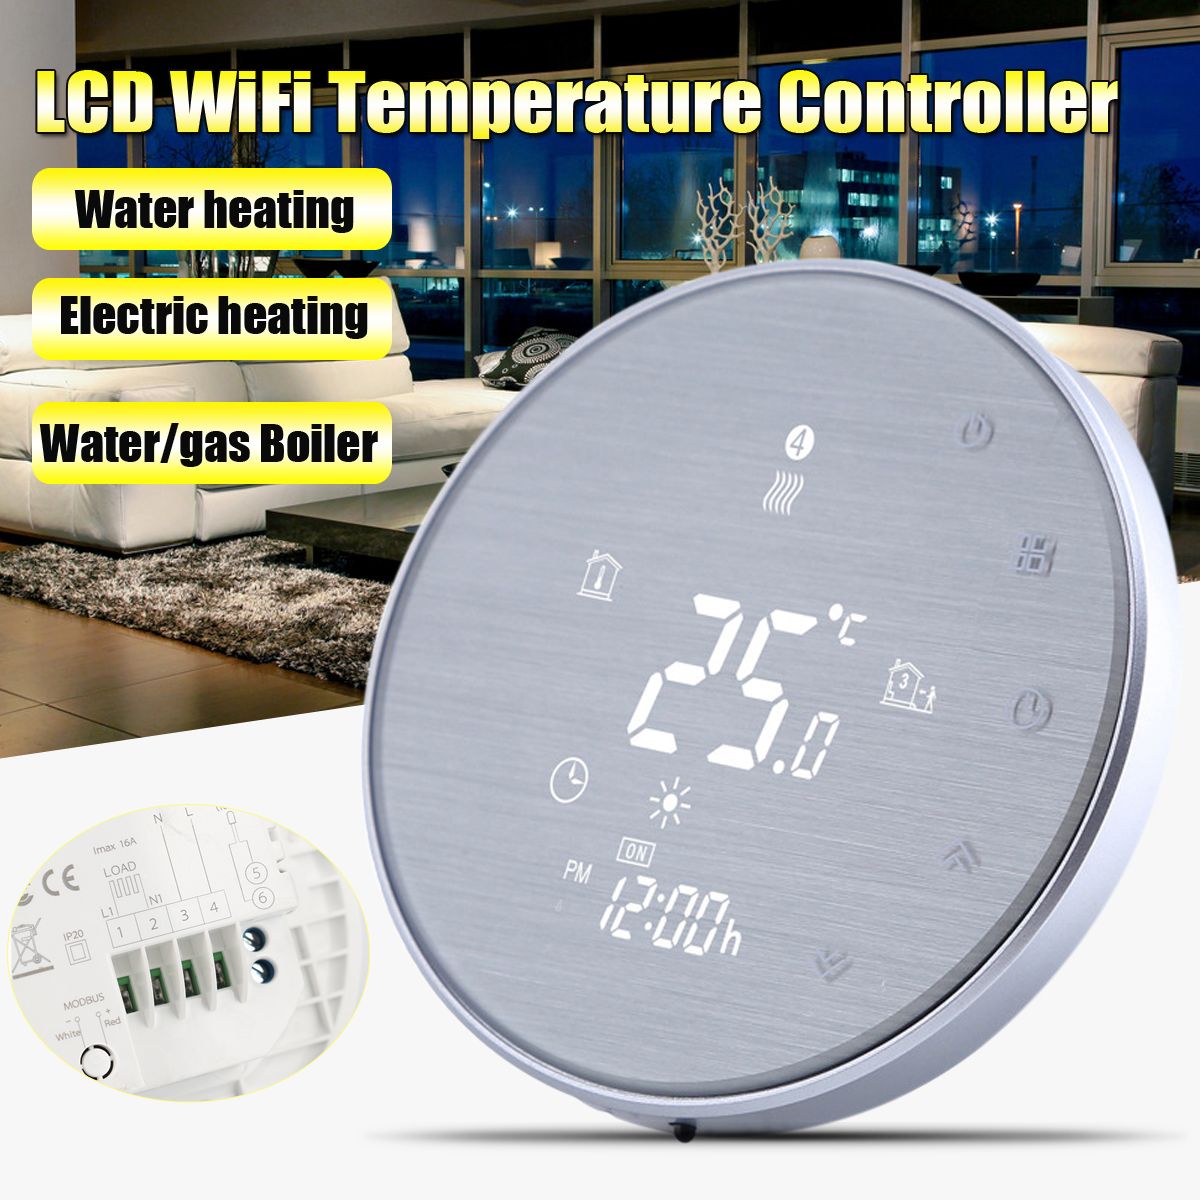 WiFi-Temperature-Controller-LCD-Display-Water-Floor-Heating-Fireplace-Temperature-Control-1670789-1